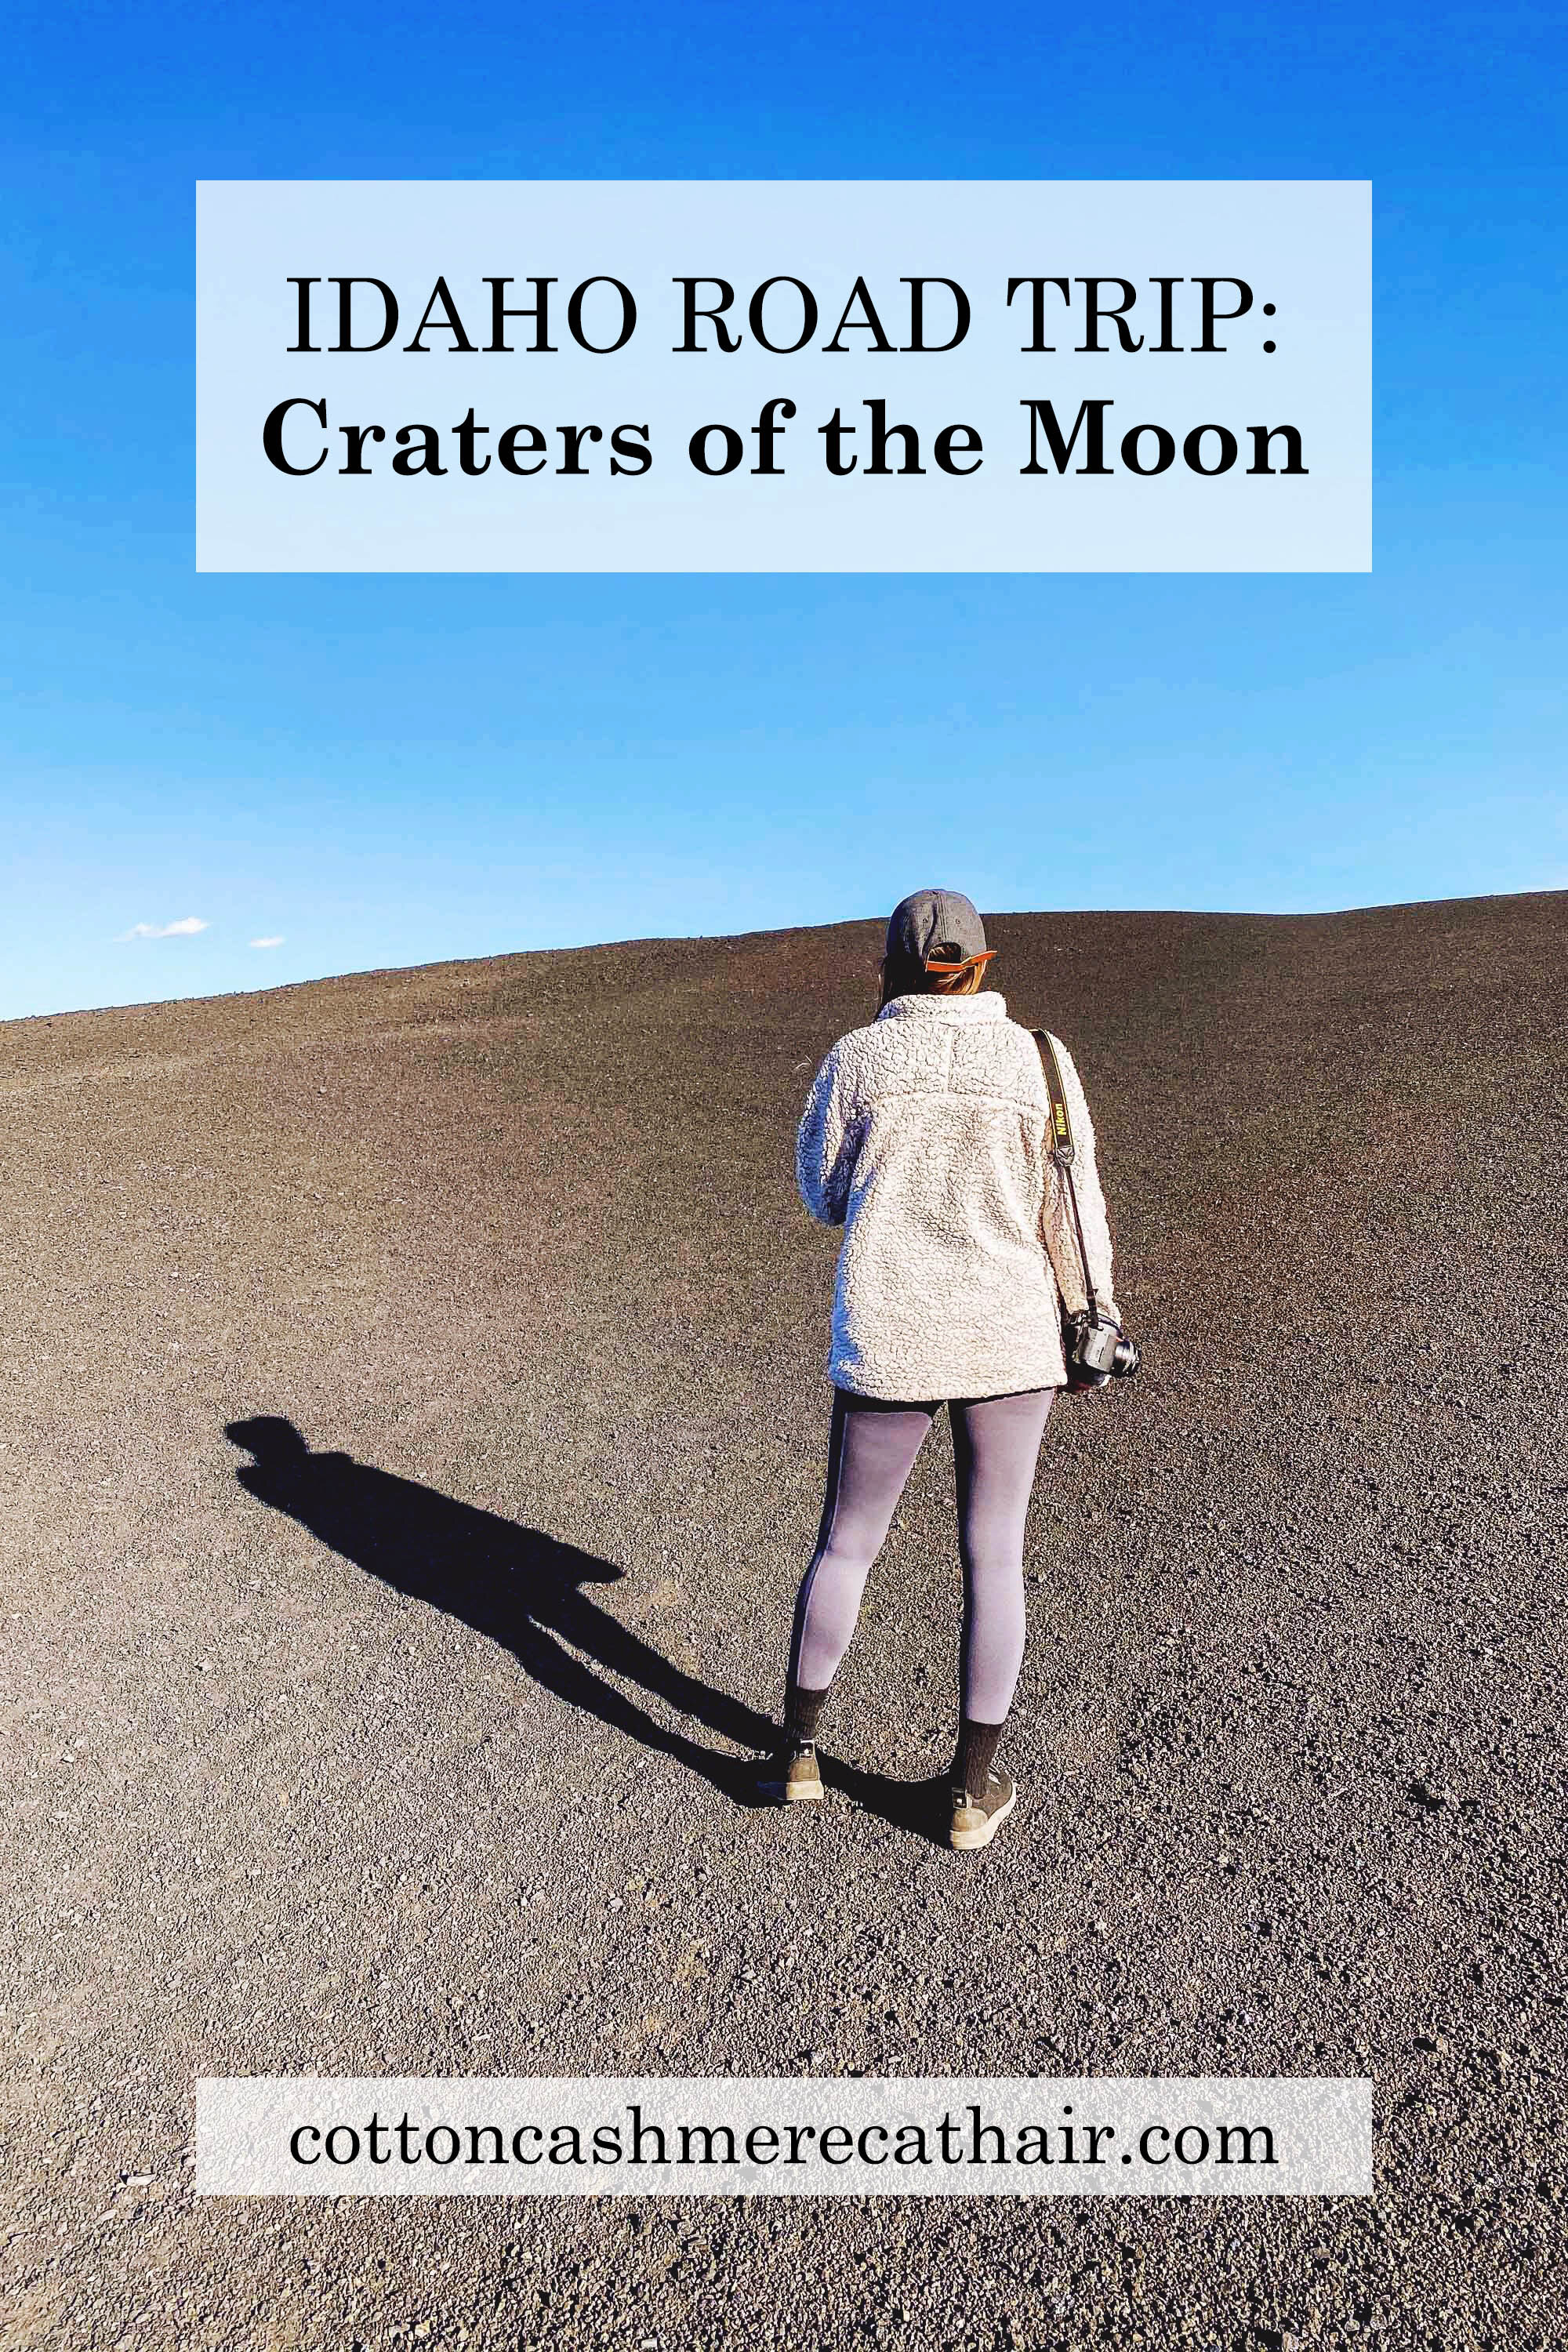 Where to stop on an Idaho road trip: Craters of the Moon